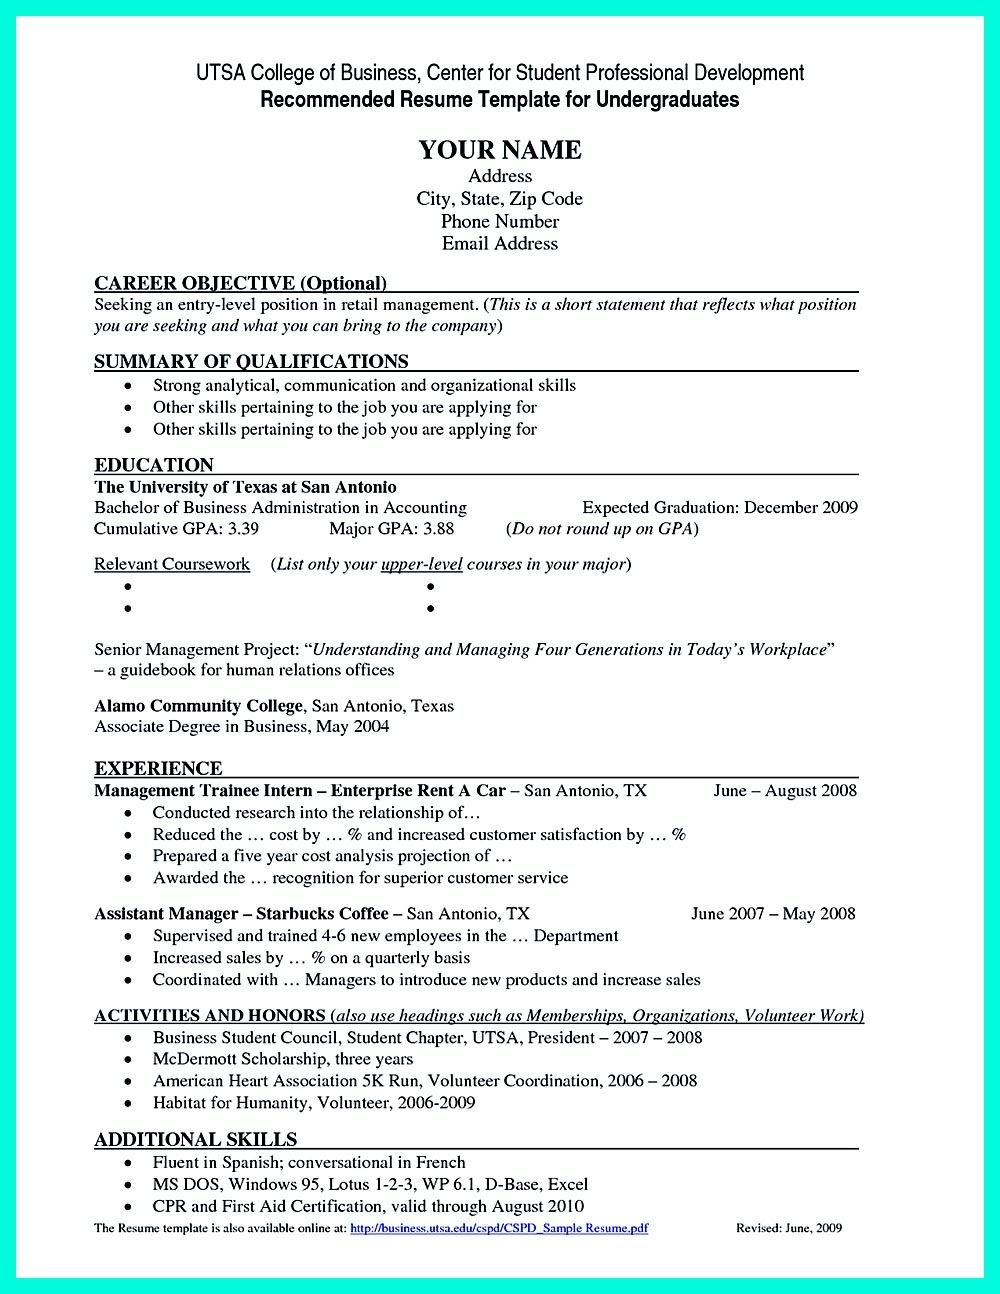 resume for college grads with no experience